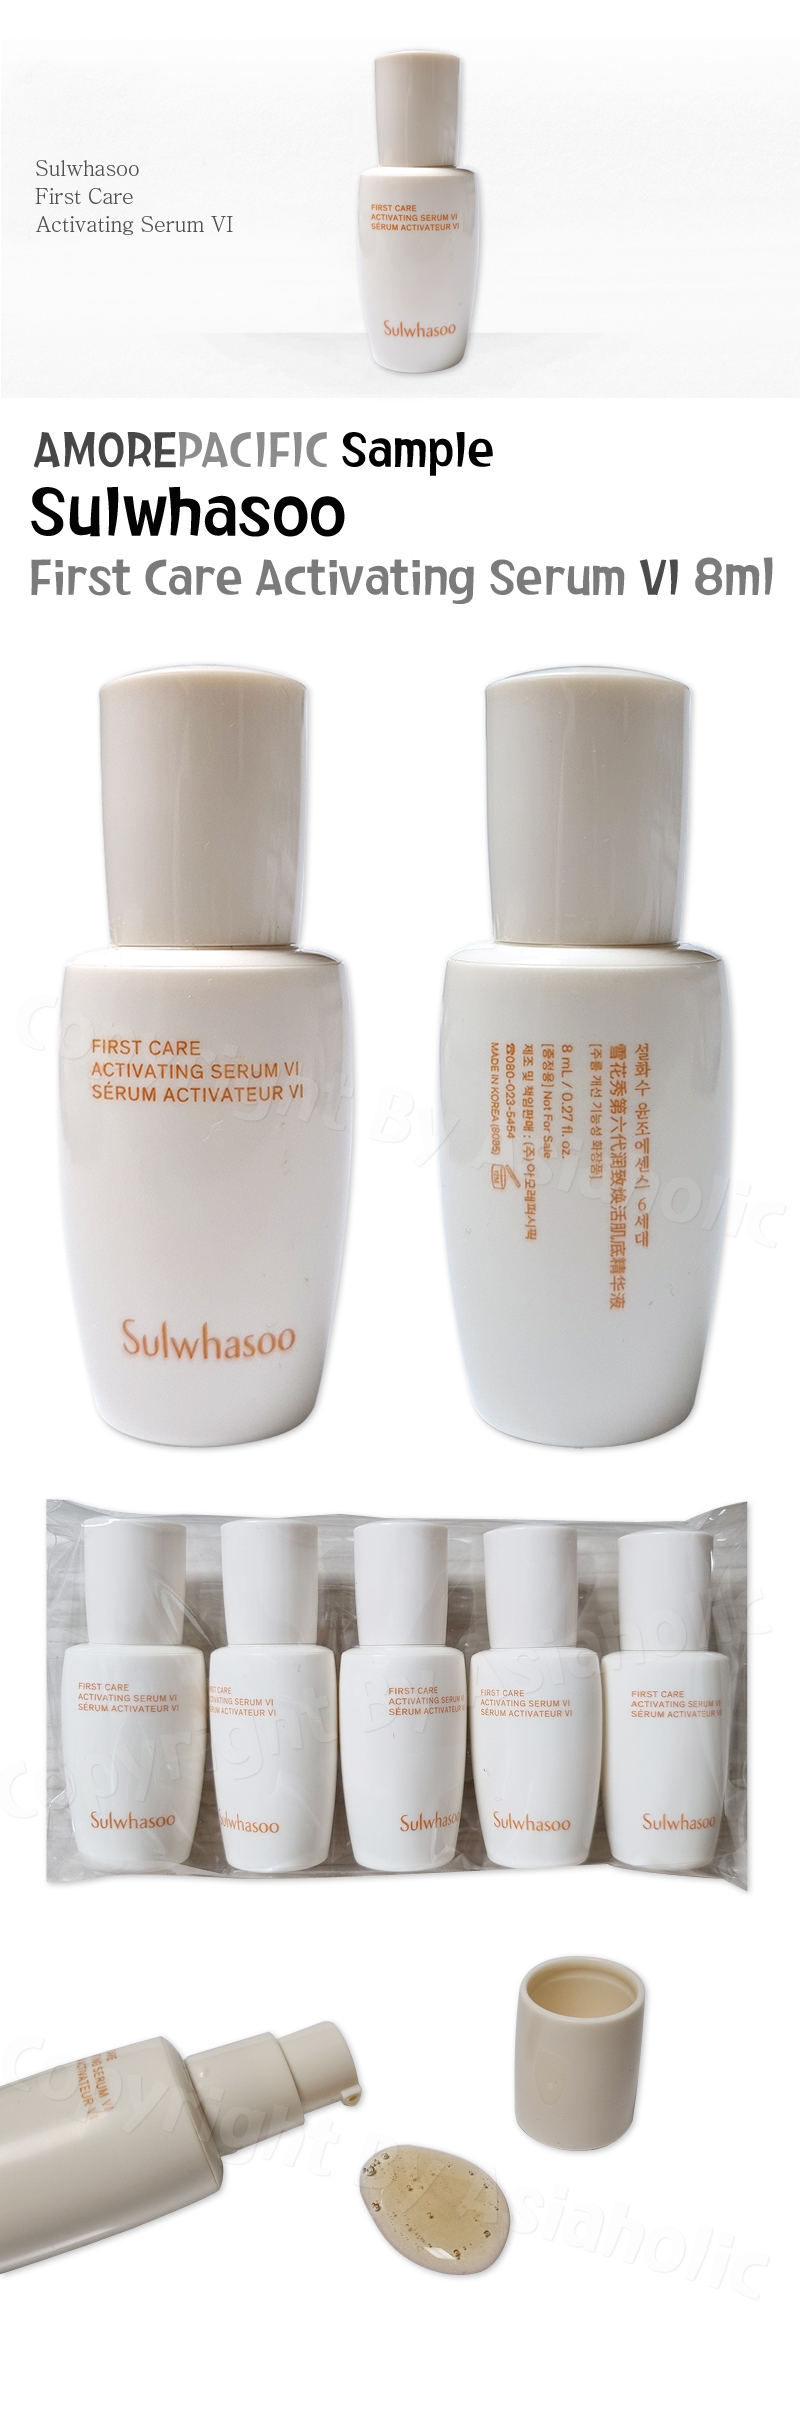 Sulwhasoo First Care Activating Serum VI 8ml (1pcs ~ 20pcs) Sample Newest Version